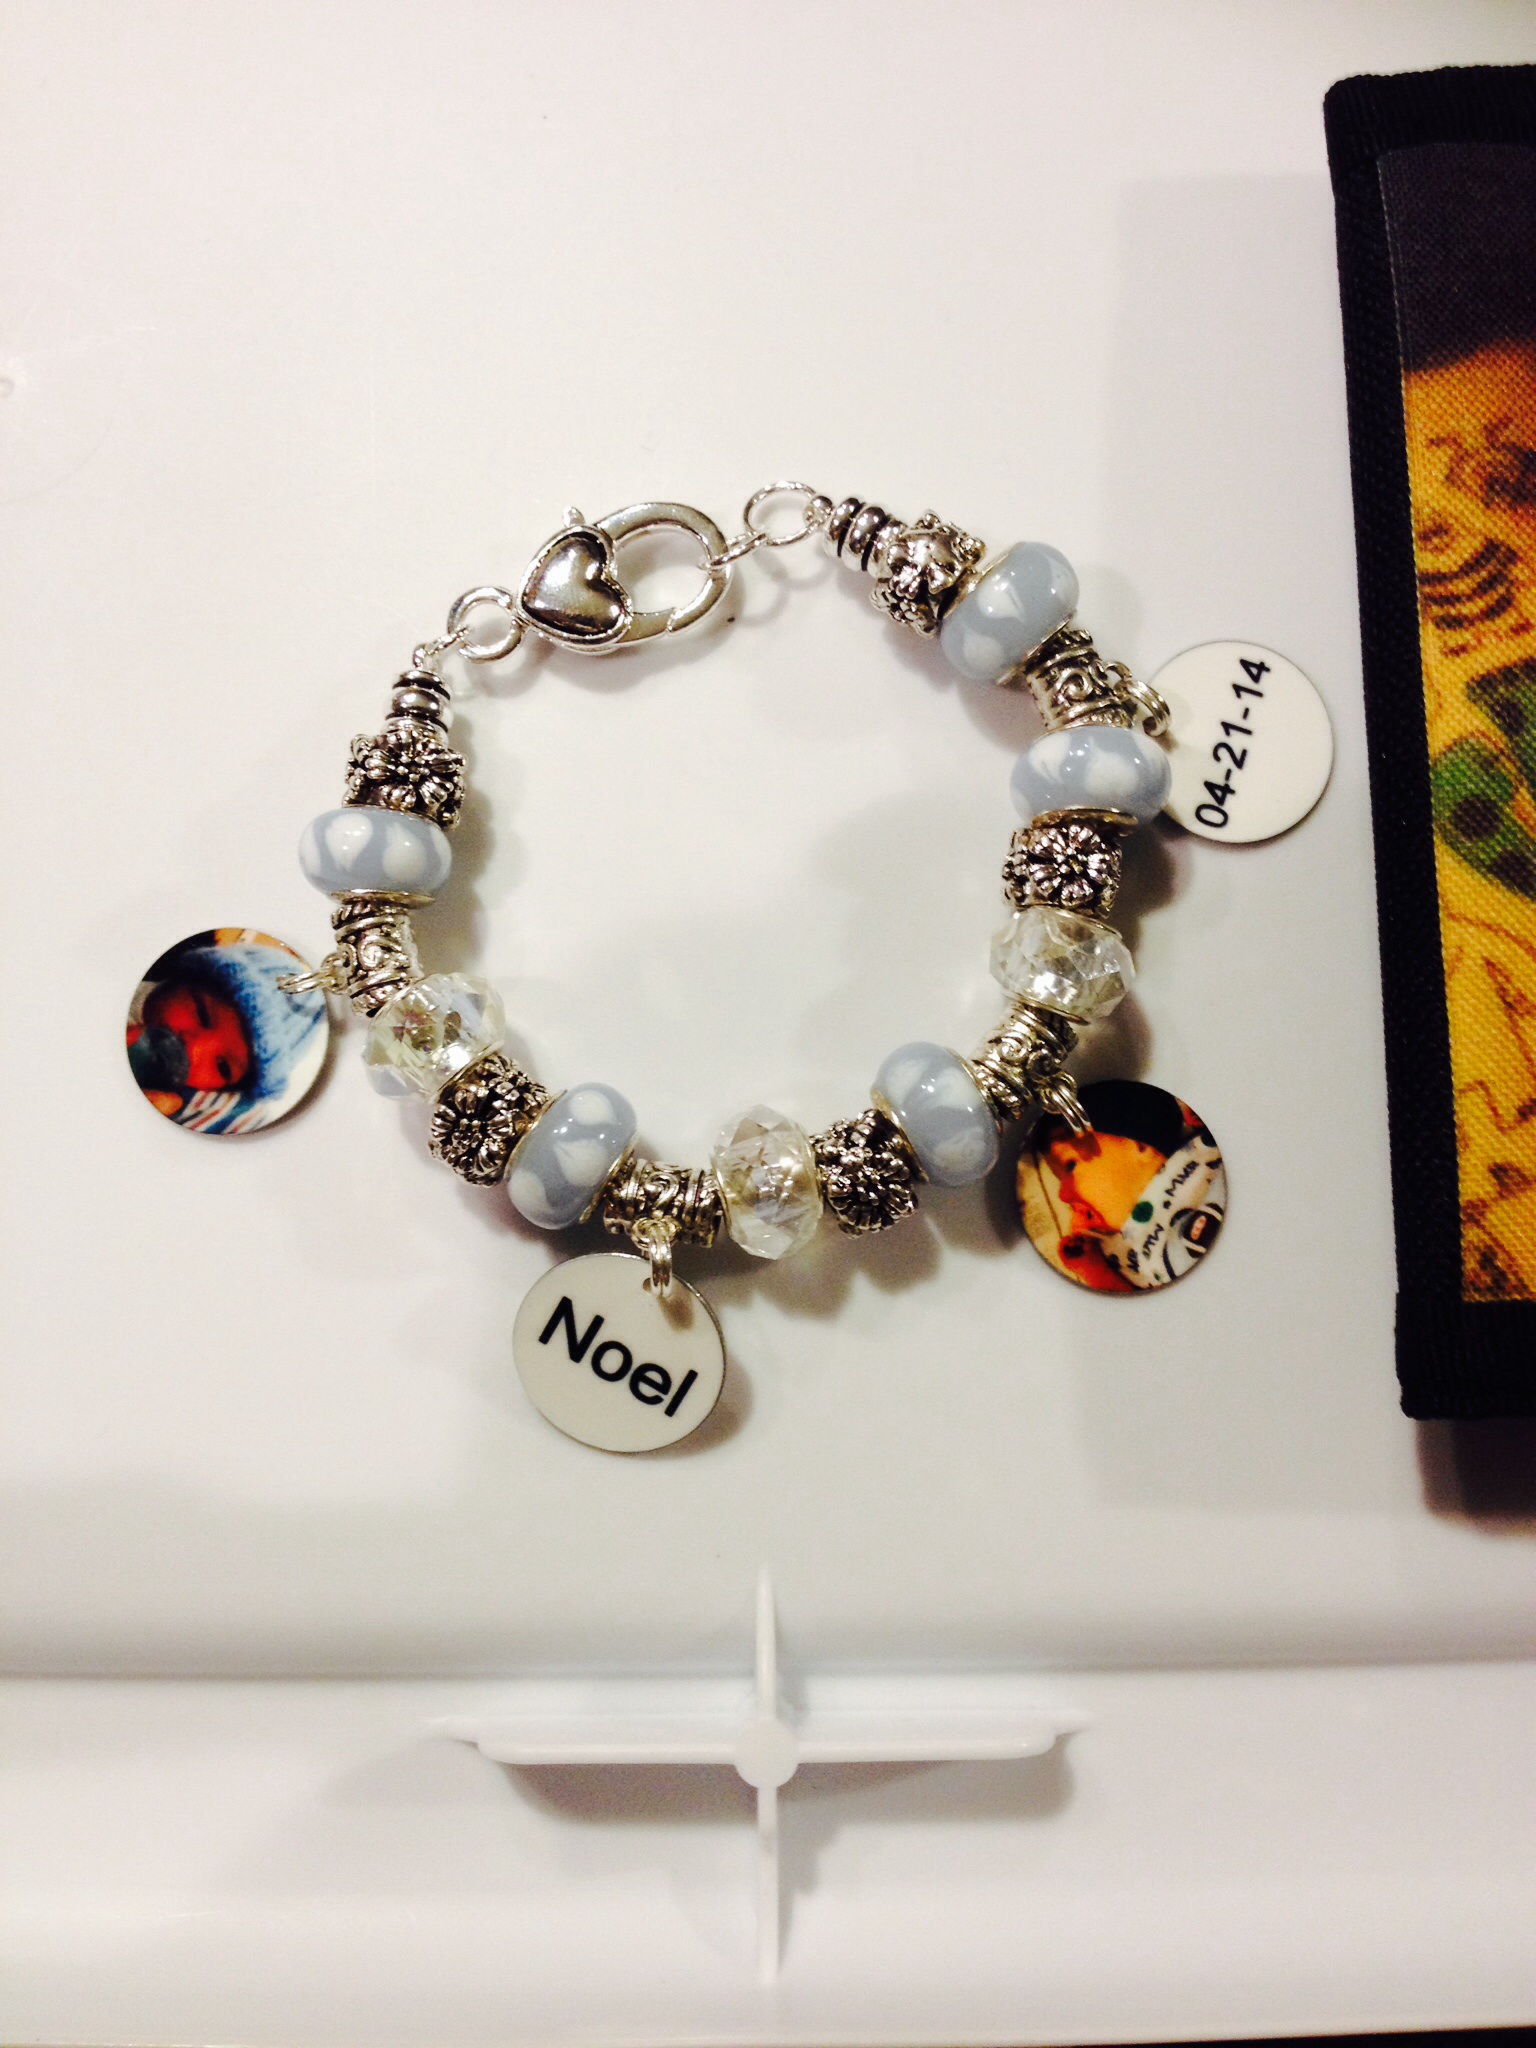 New Mothers Bracelet made with sublimation printing